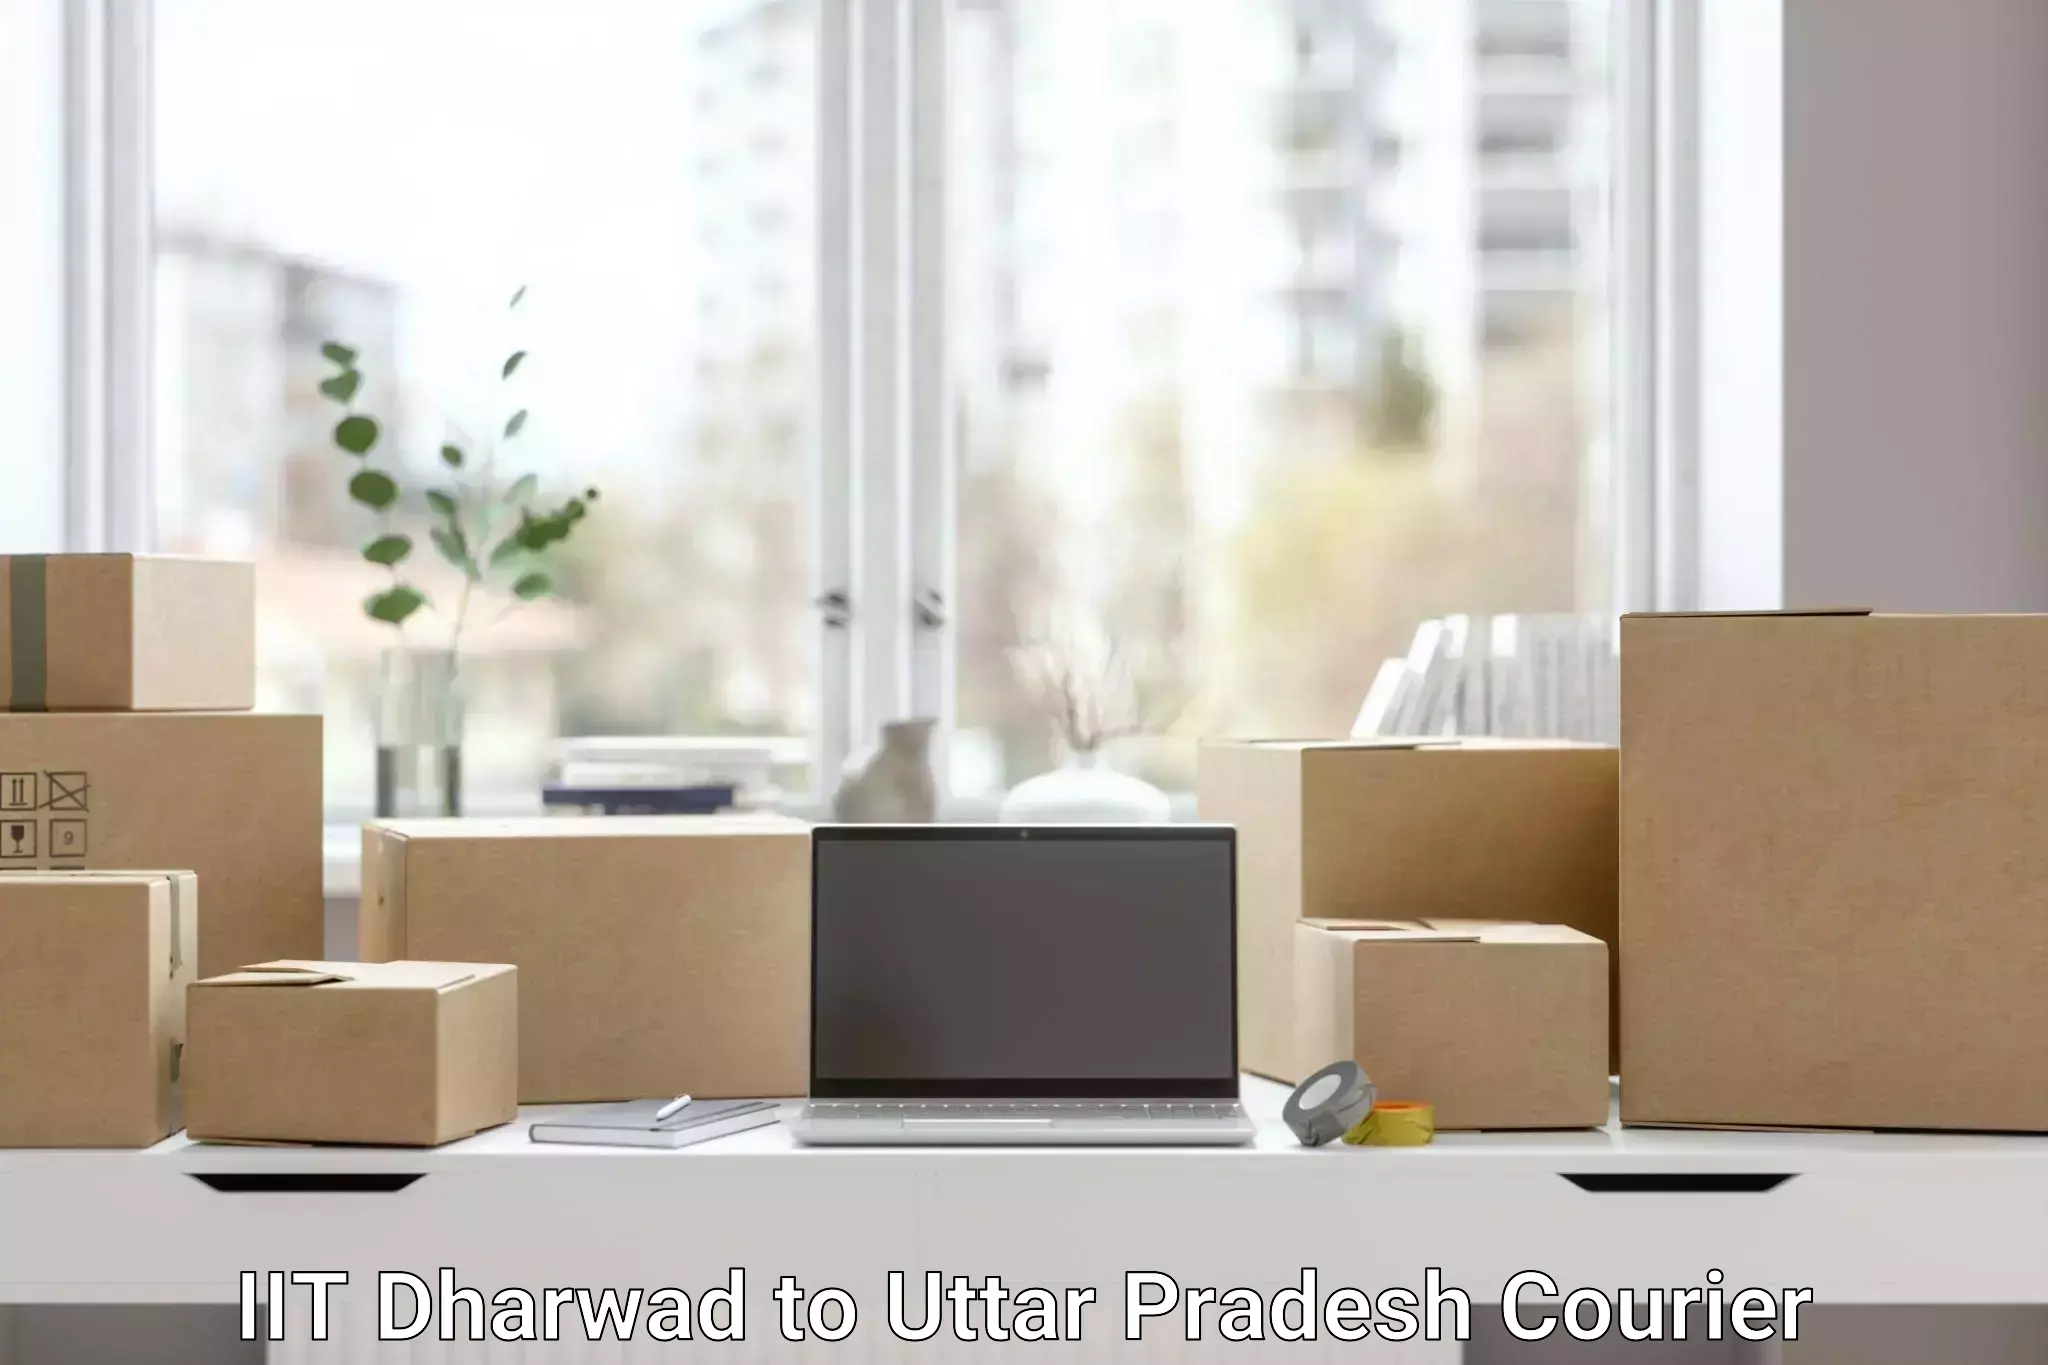 Express delivery capabilities IIT Dharwad to Allahabad